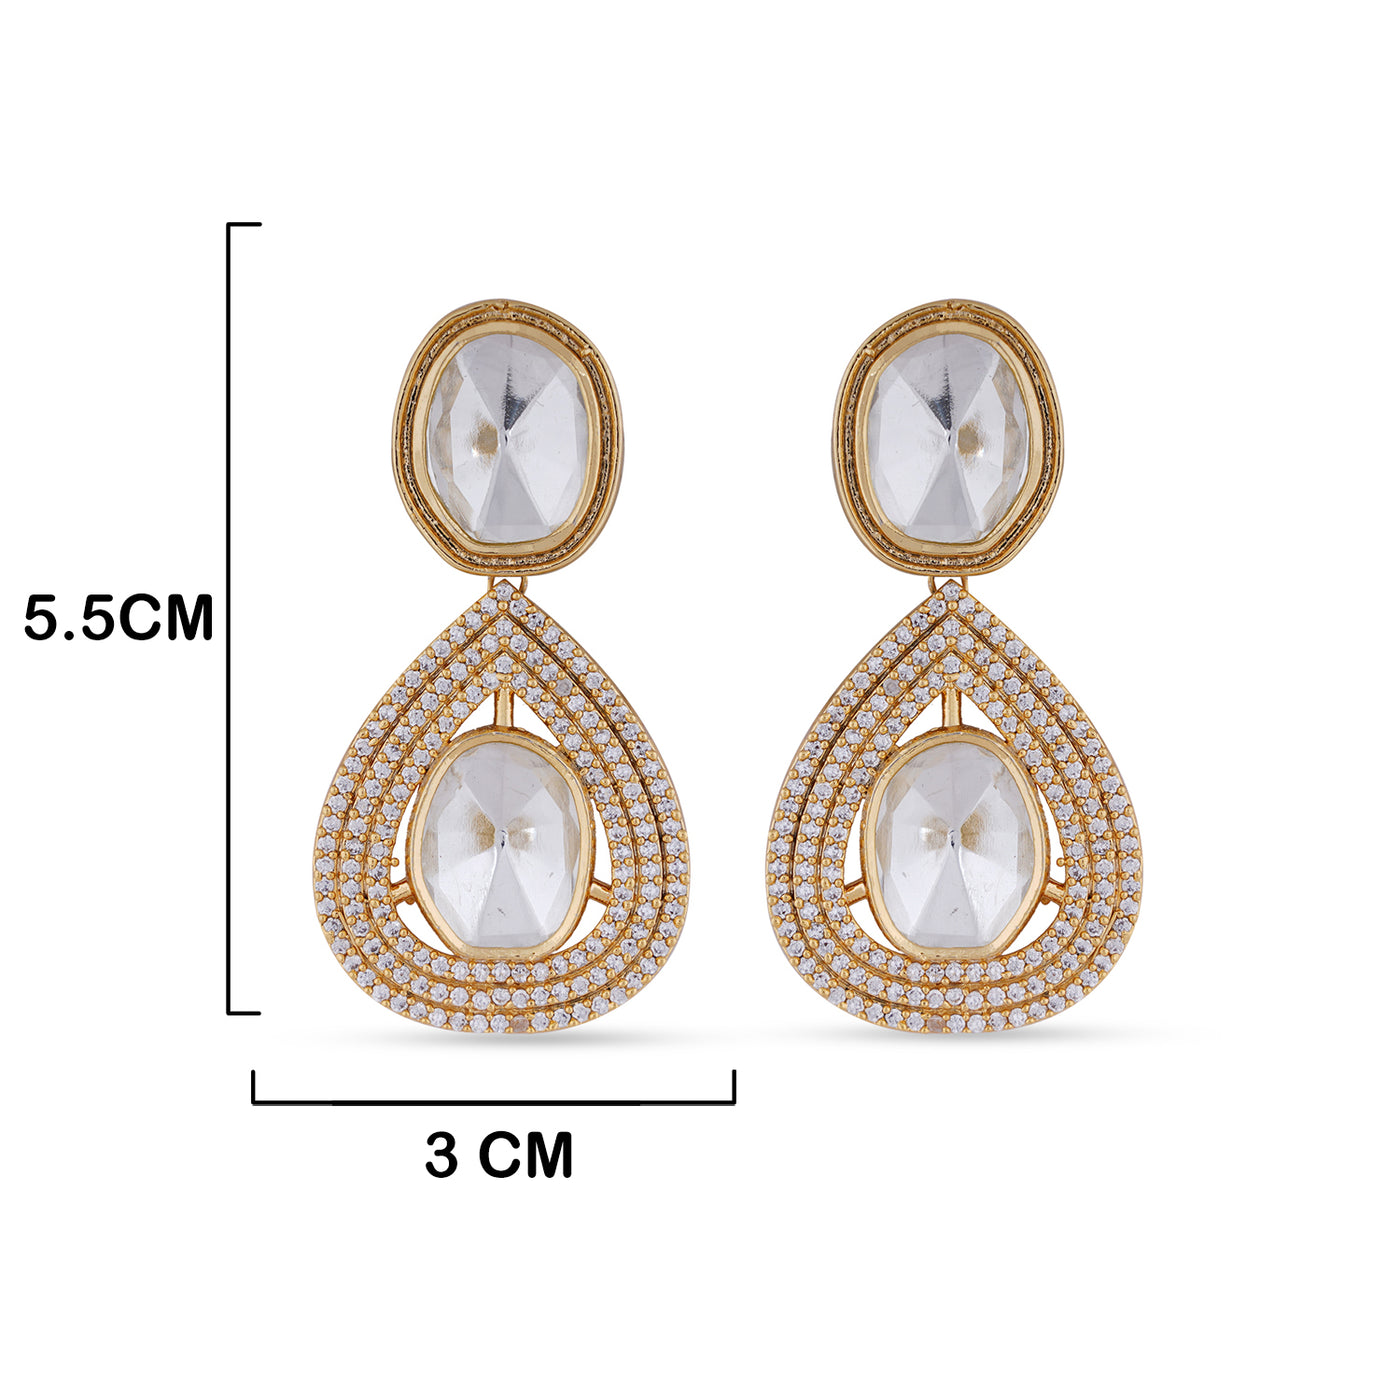 Polki and CZ Kundan Earrings with measurements in cm. 5.5cm by 3cm.